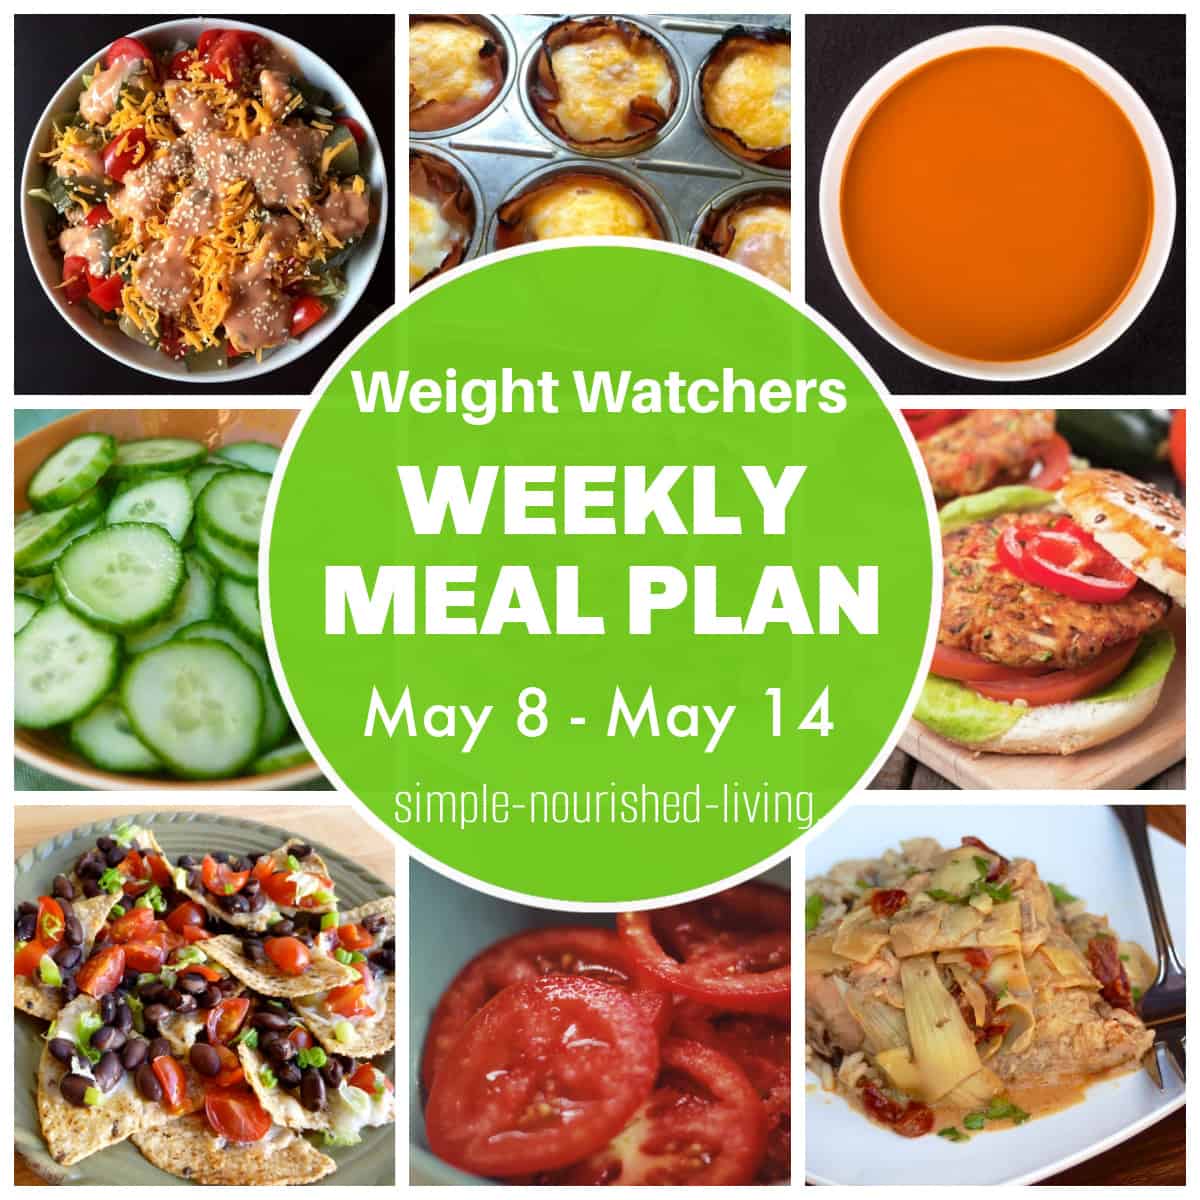 Food Photo Collage: Big Mac Salad, Ham and Egg Cups, Tomato Soup, Sliced Cucumber Saald, Veggie Burger, Black Bean and Cheese Nachos, Sliced Tomatoes, 4 Ingredient Goddess Chicken with Artichokes. Round Green Text Box Overlay: Weight Watchers Weekly Meal Plan May 8 to May 14